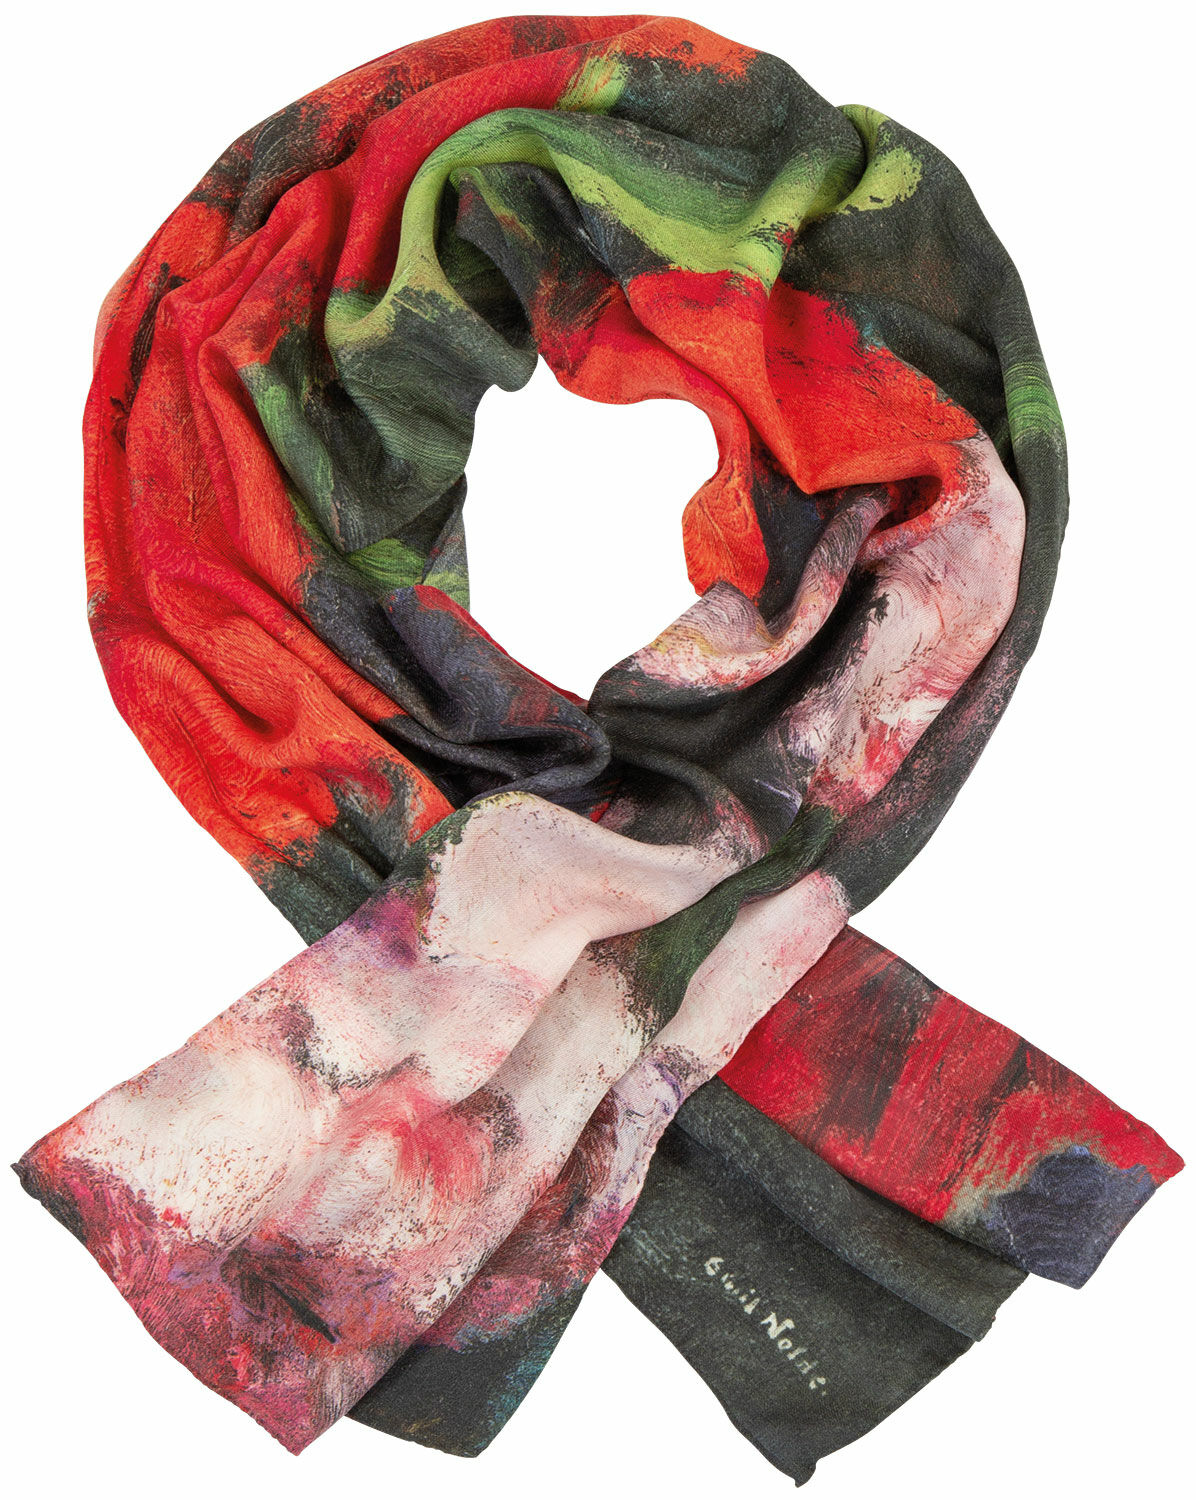 Wool scarf "Large Poppies (Red, Red, Red)" by Emil Nolde